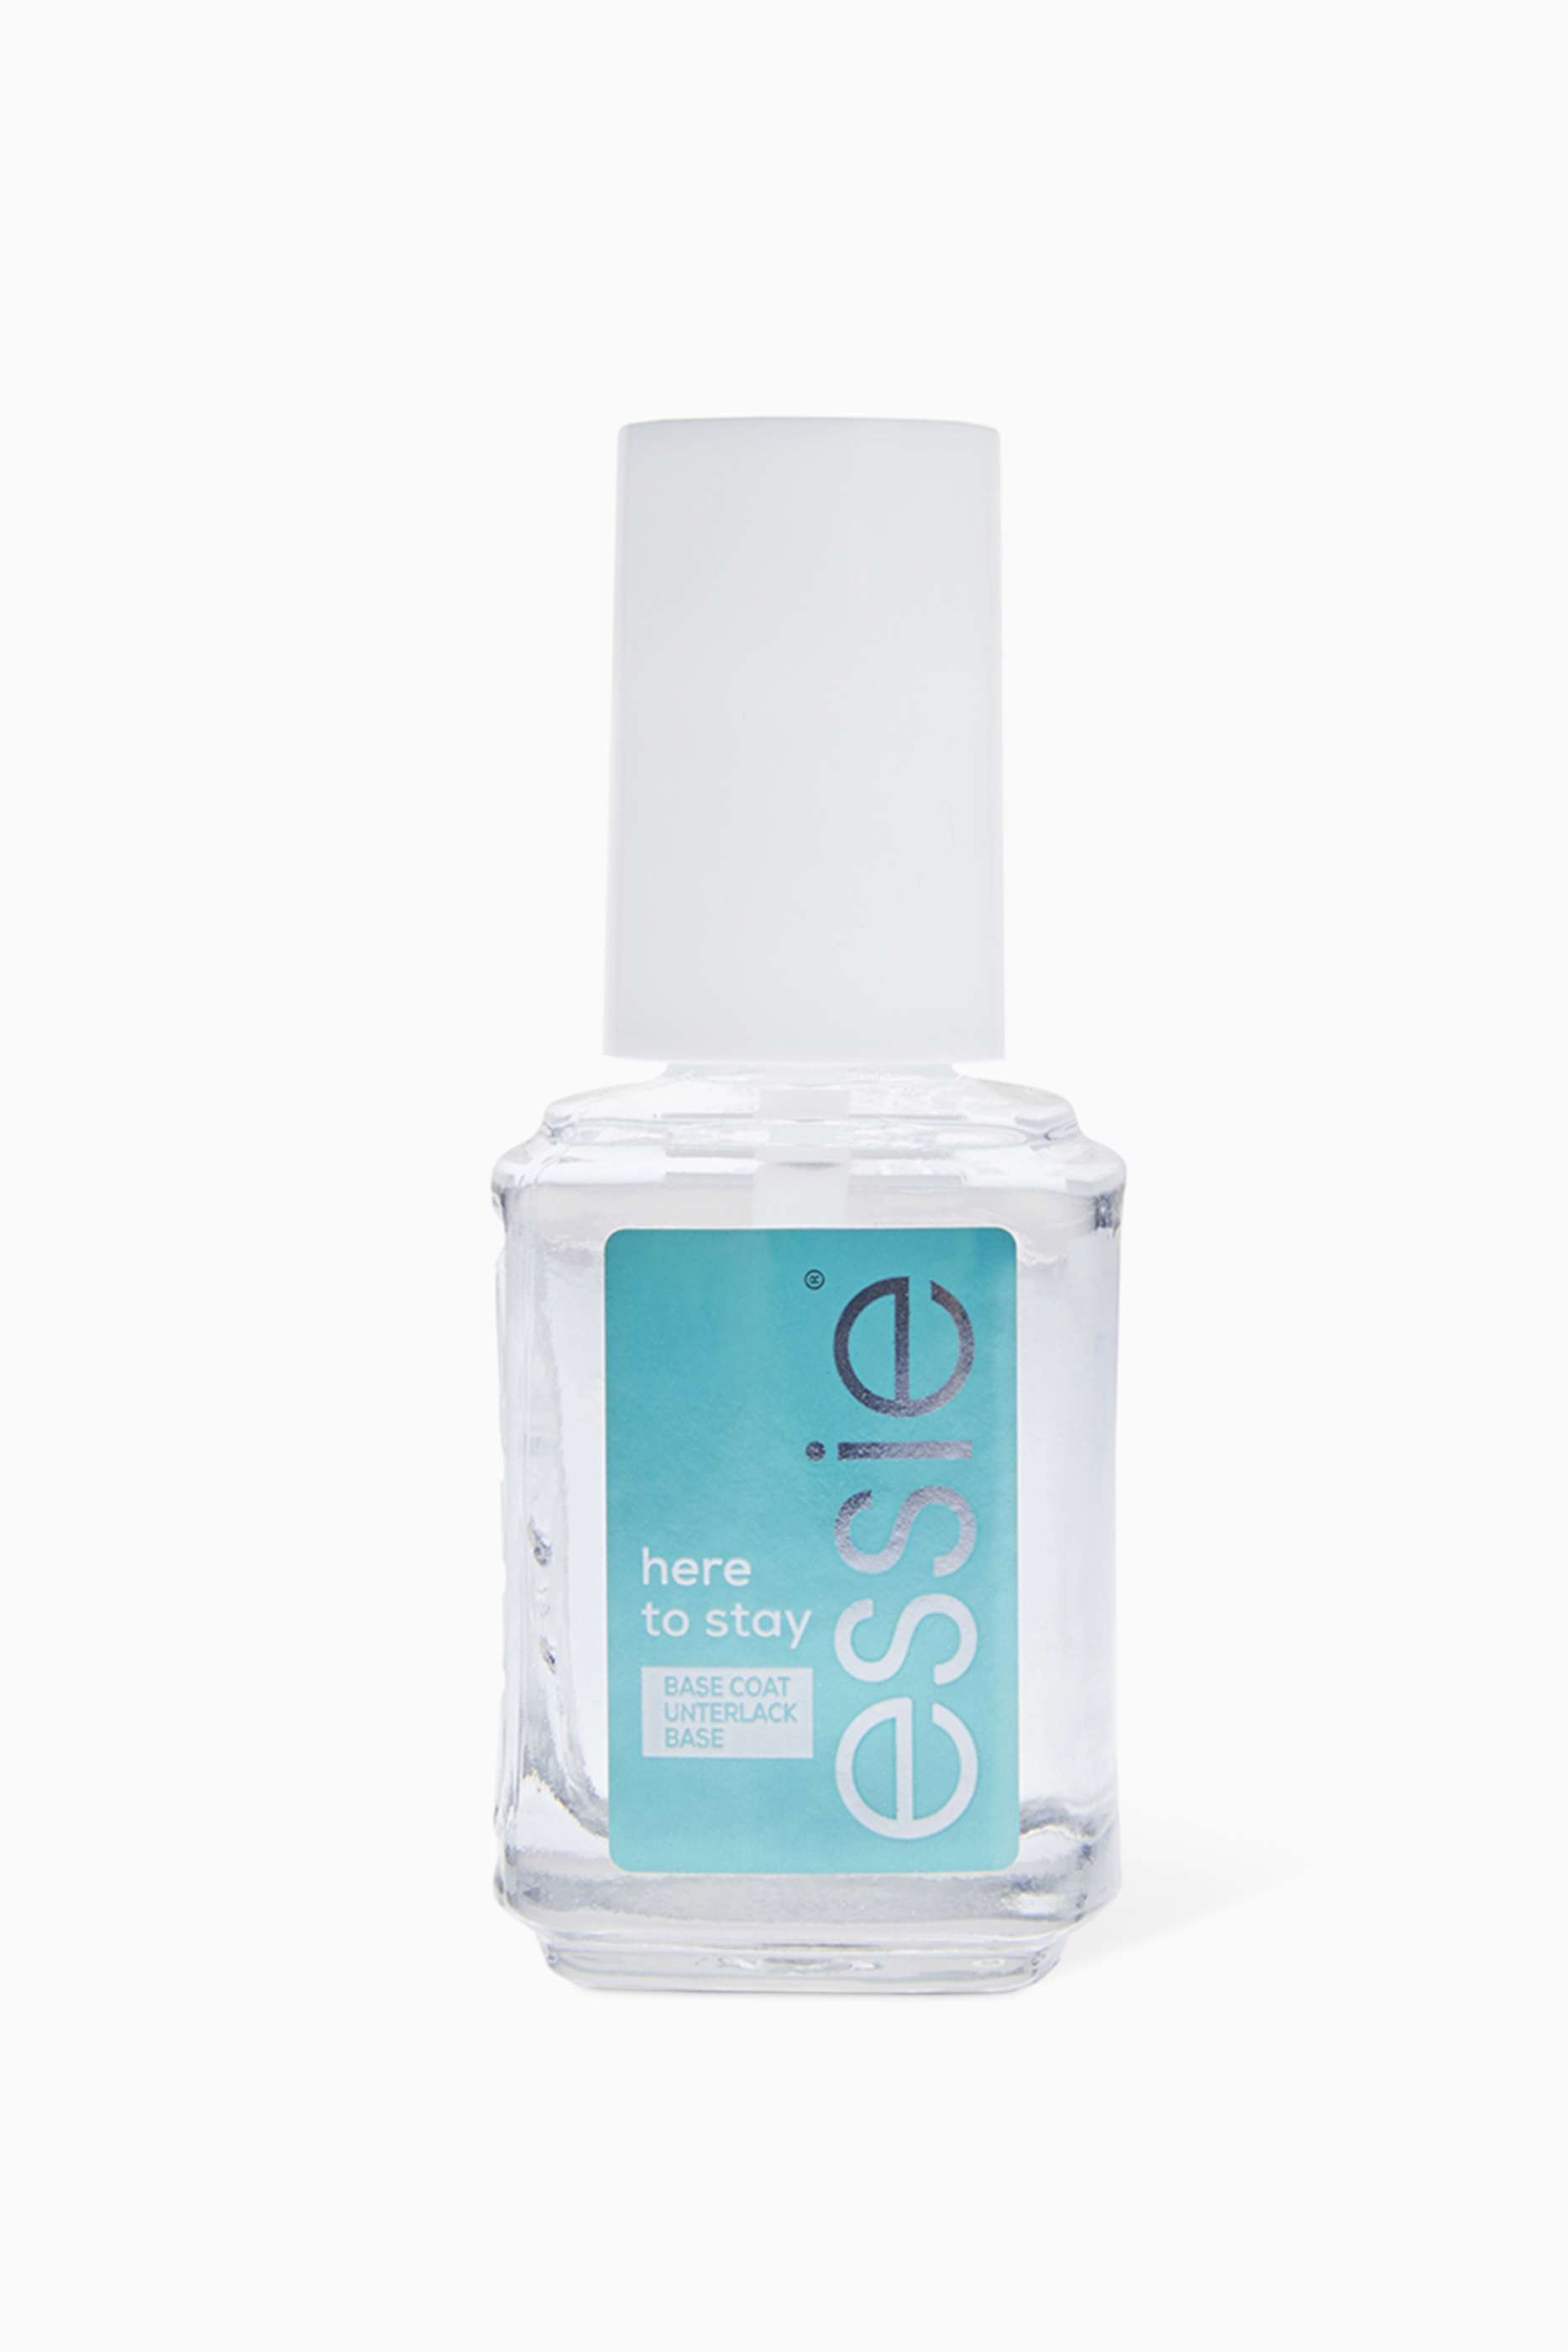 shop-essie-here-to-stay-base-coat-13-5ml-for-women